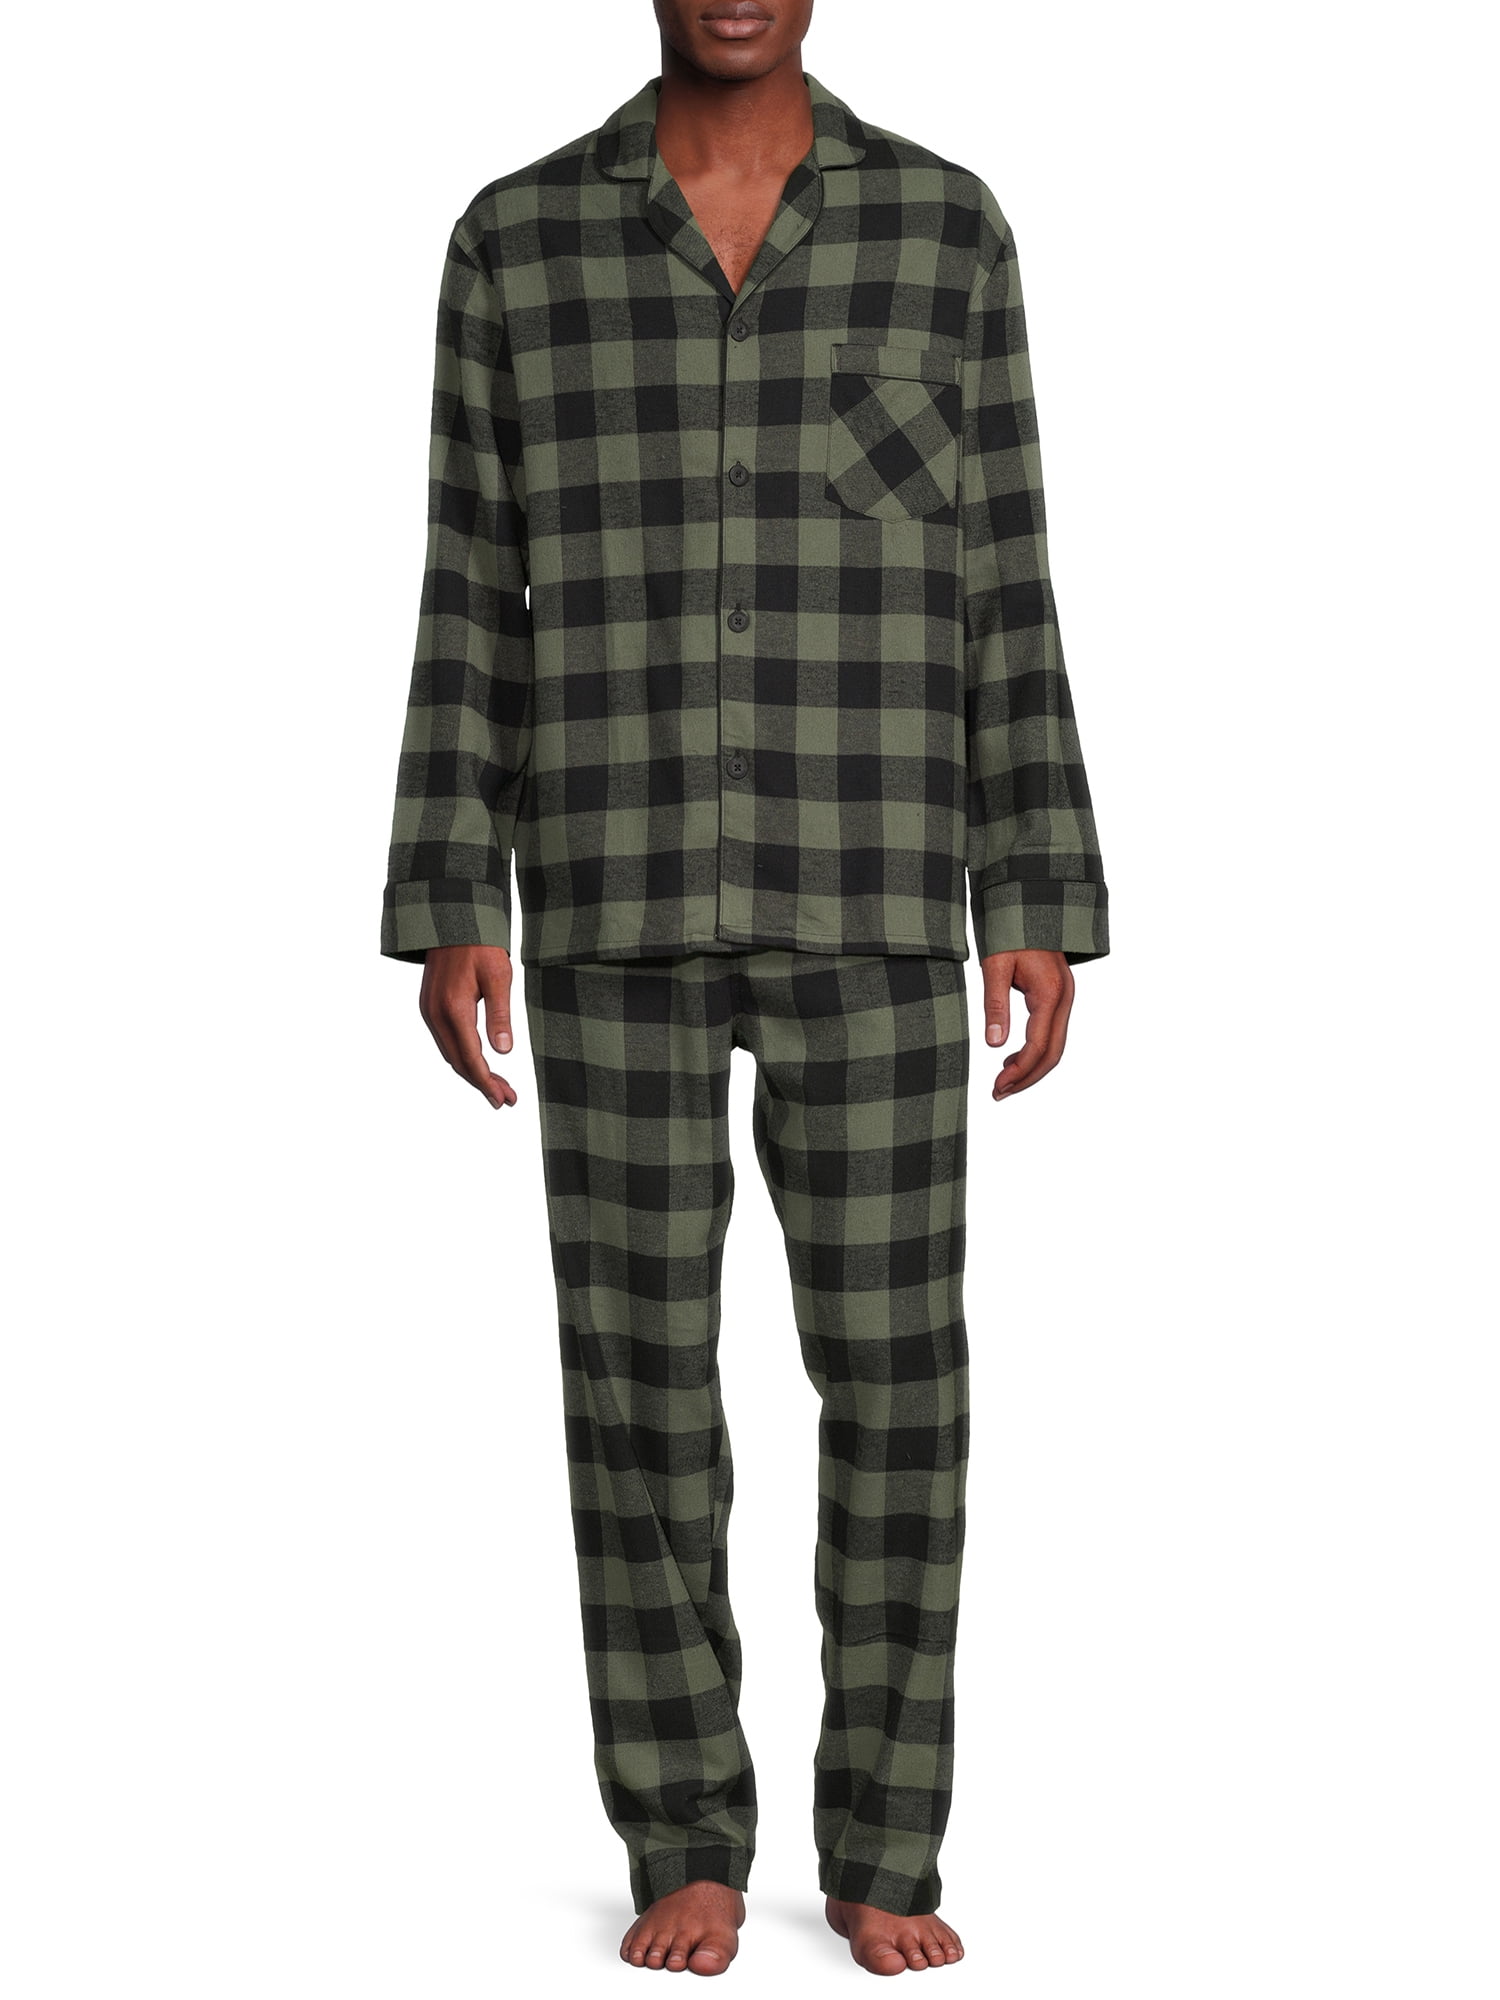 Hanes Men's and Big Men's Cotton Flannel Pajama Set, 2-Piece With Big & Tall Sizing